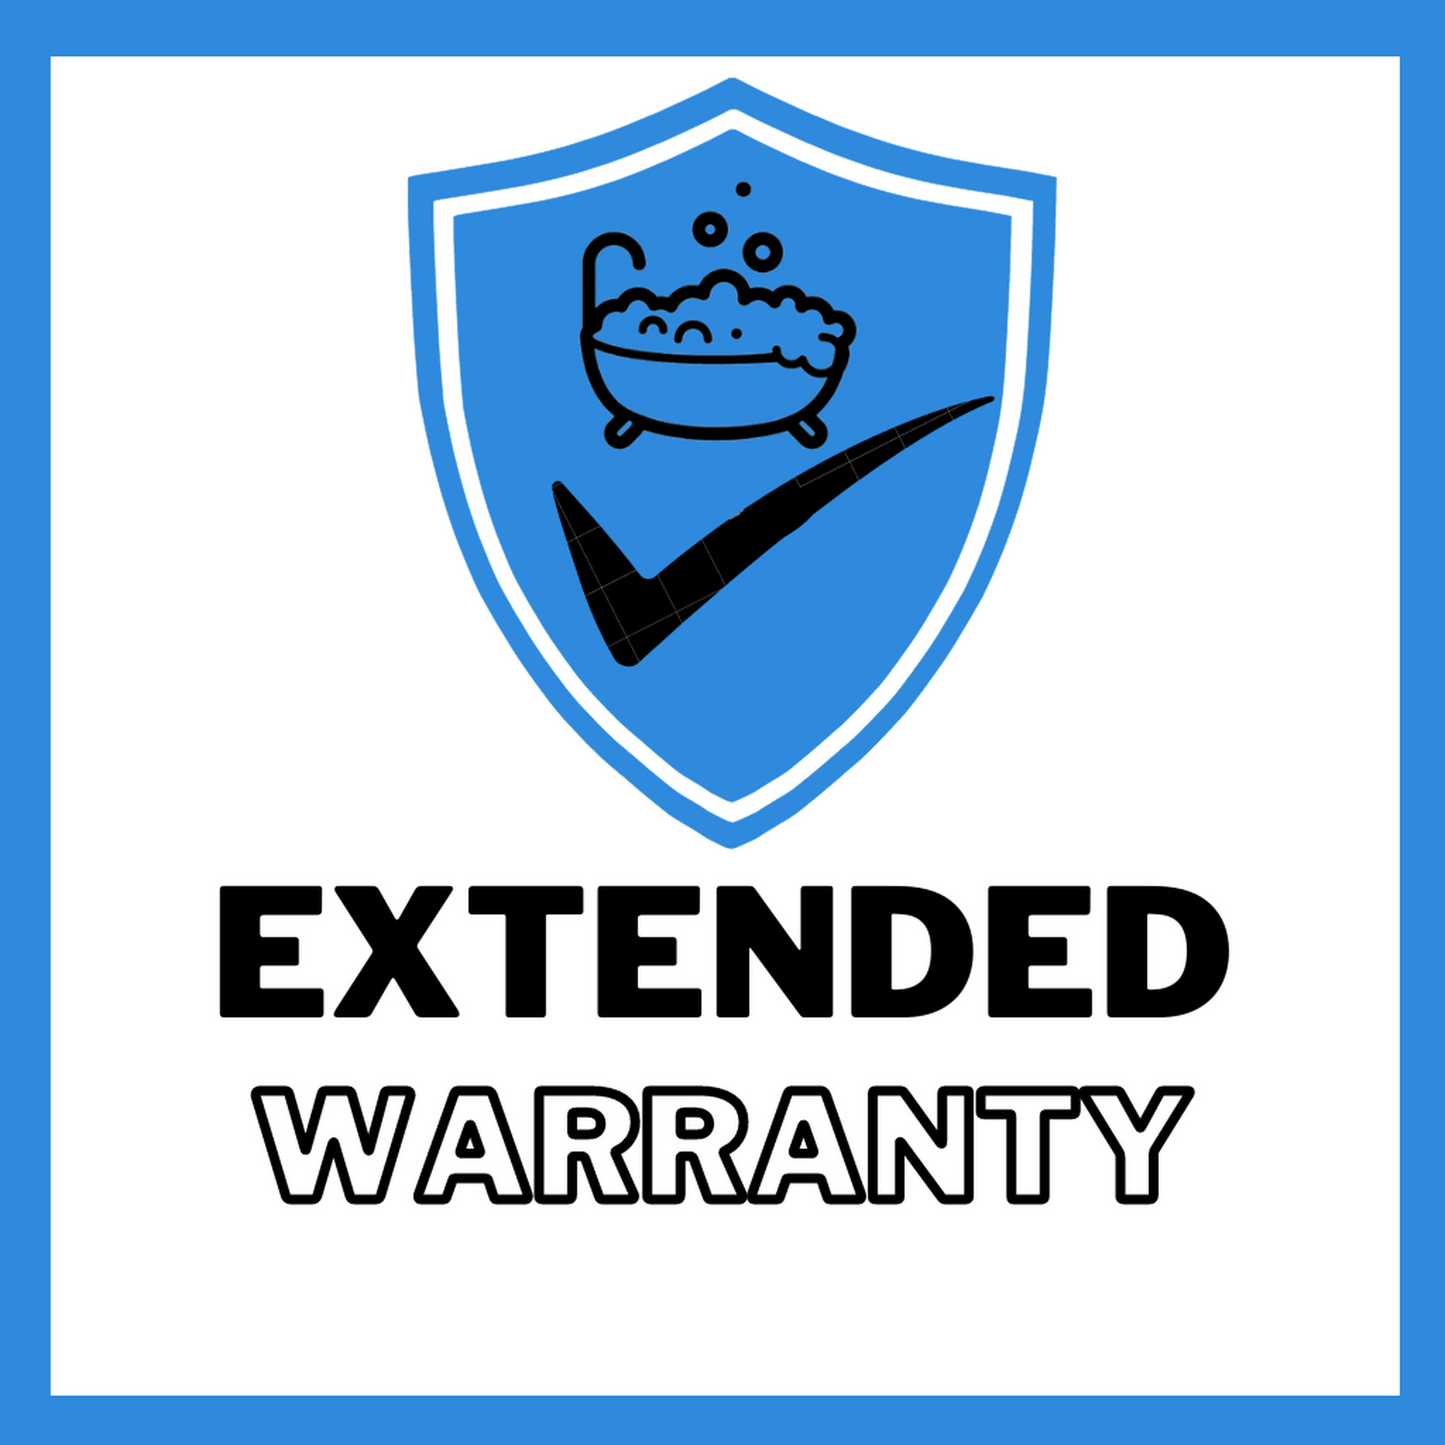 Extended Warranty [applies to products under $5999]